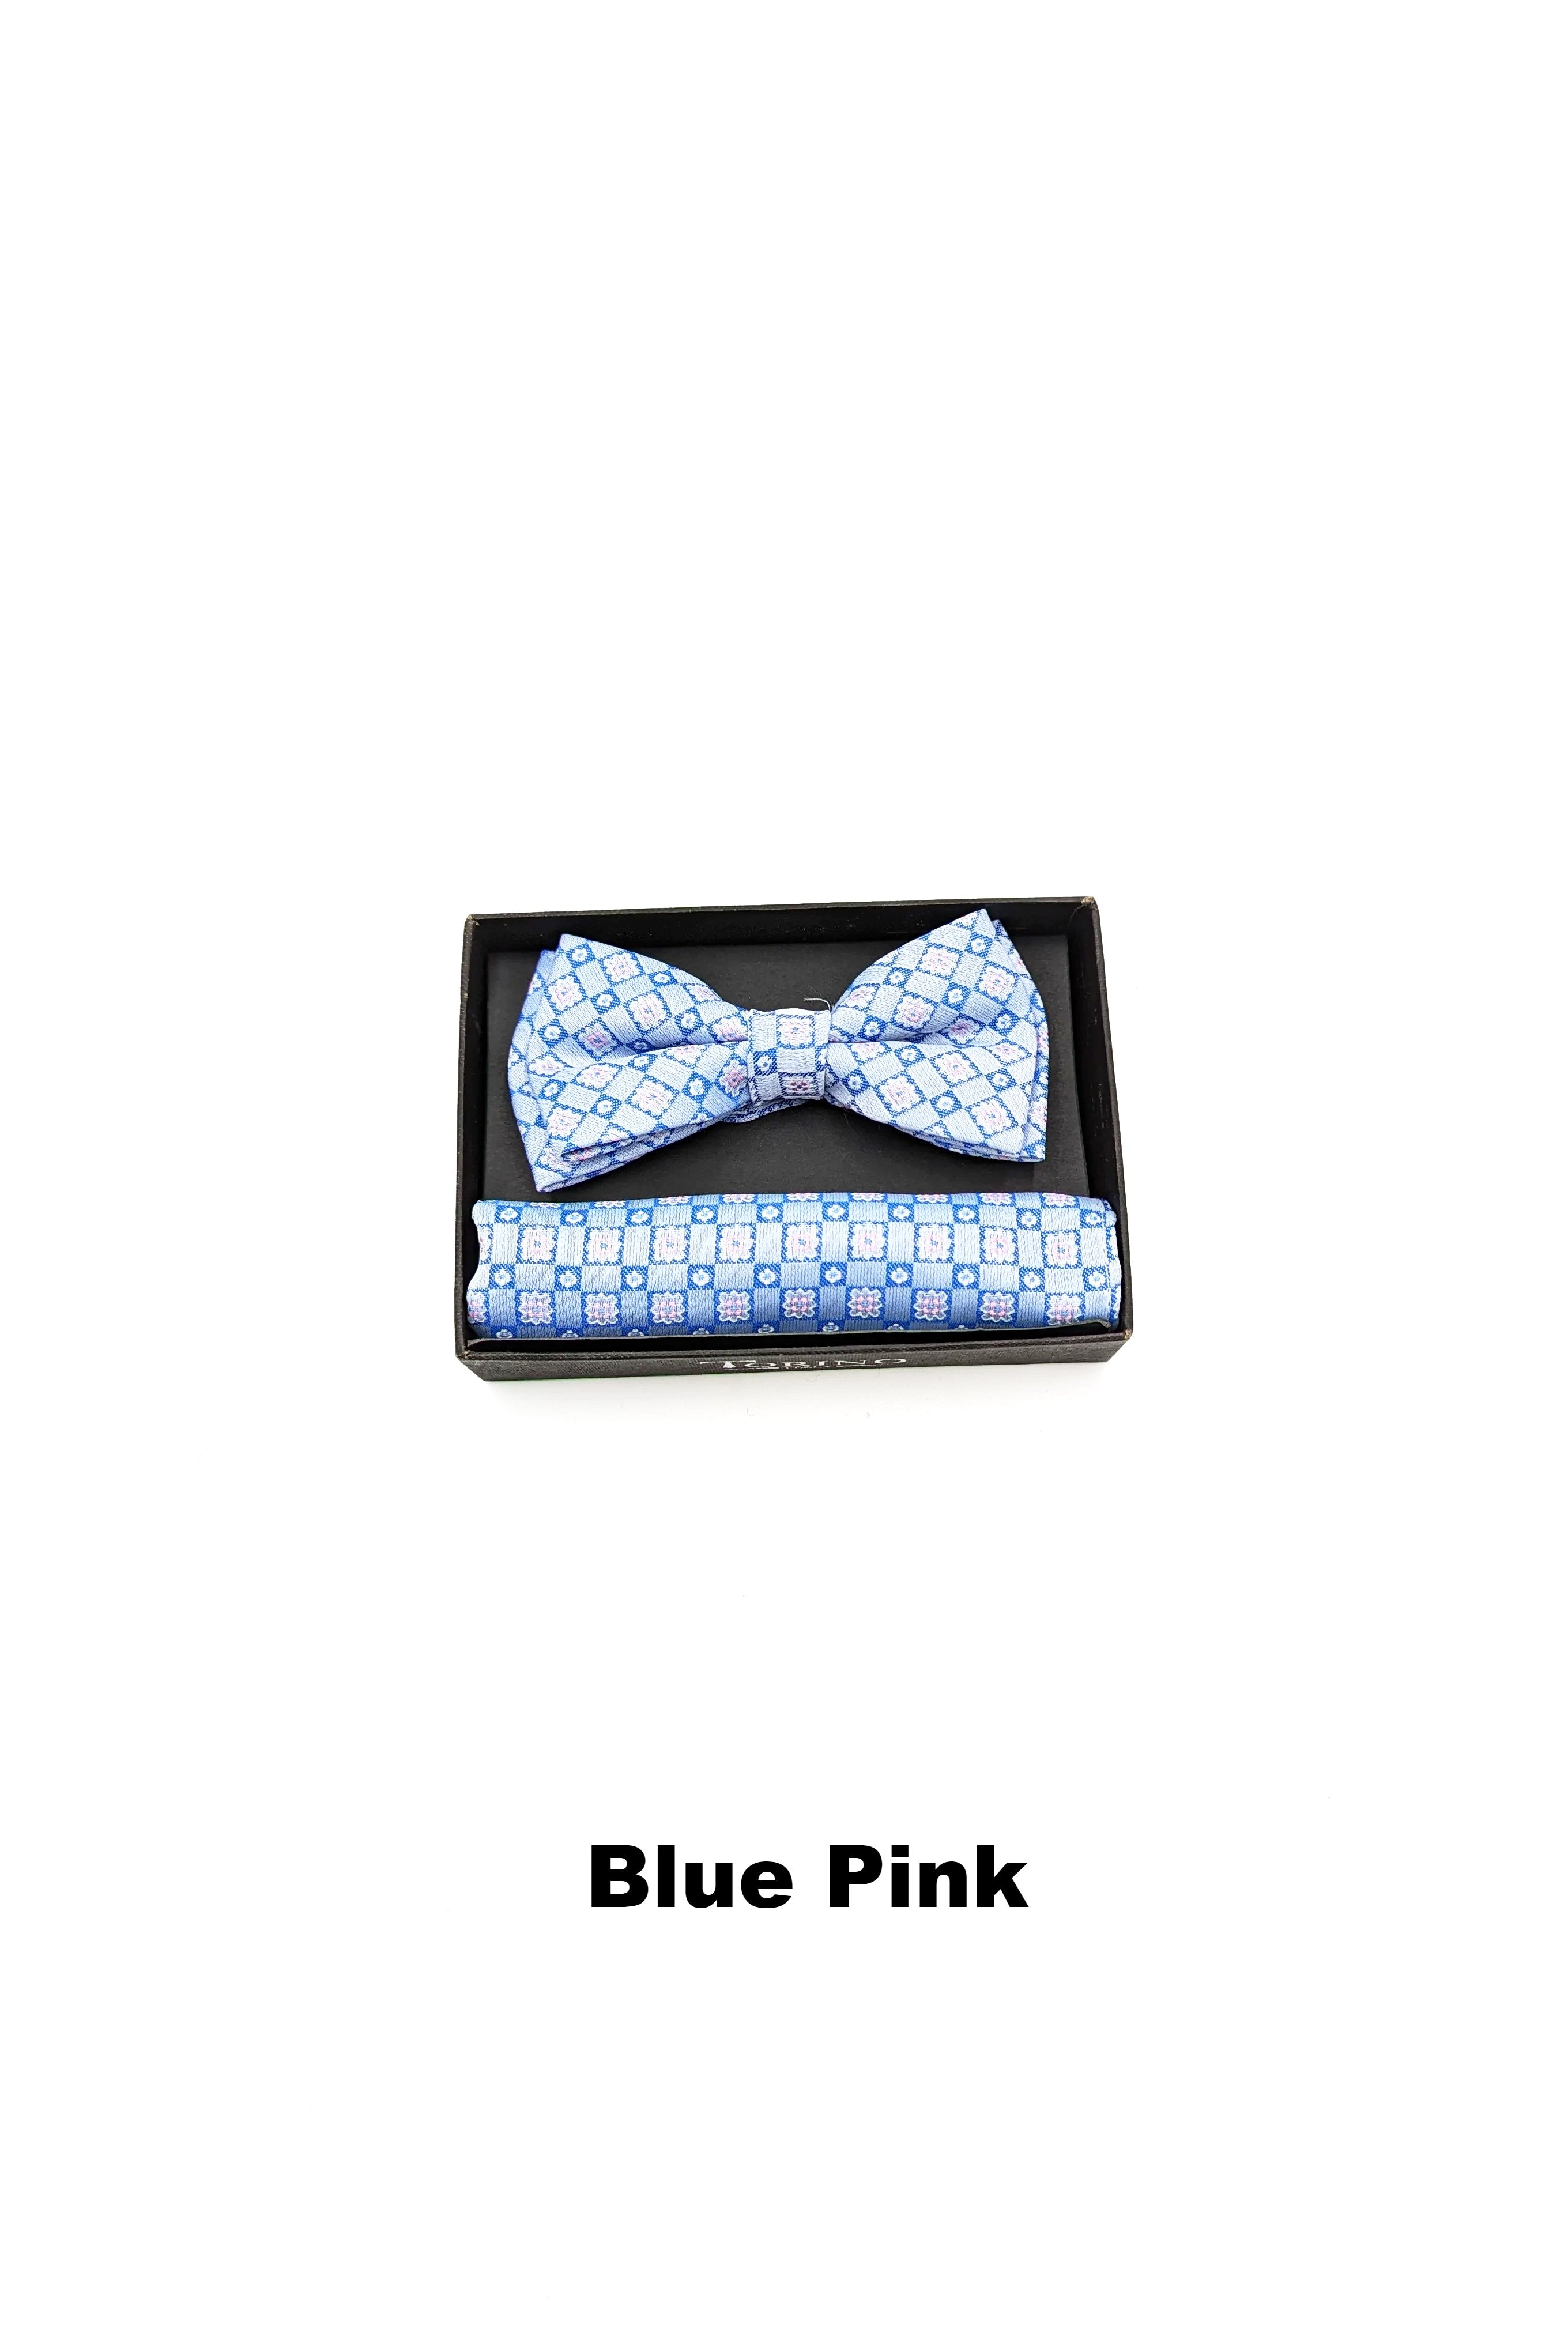 Textured Mens Blue Pink Bow and Pocket Square